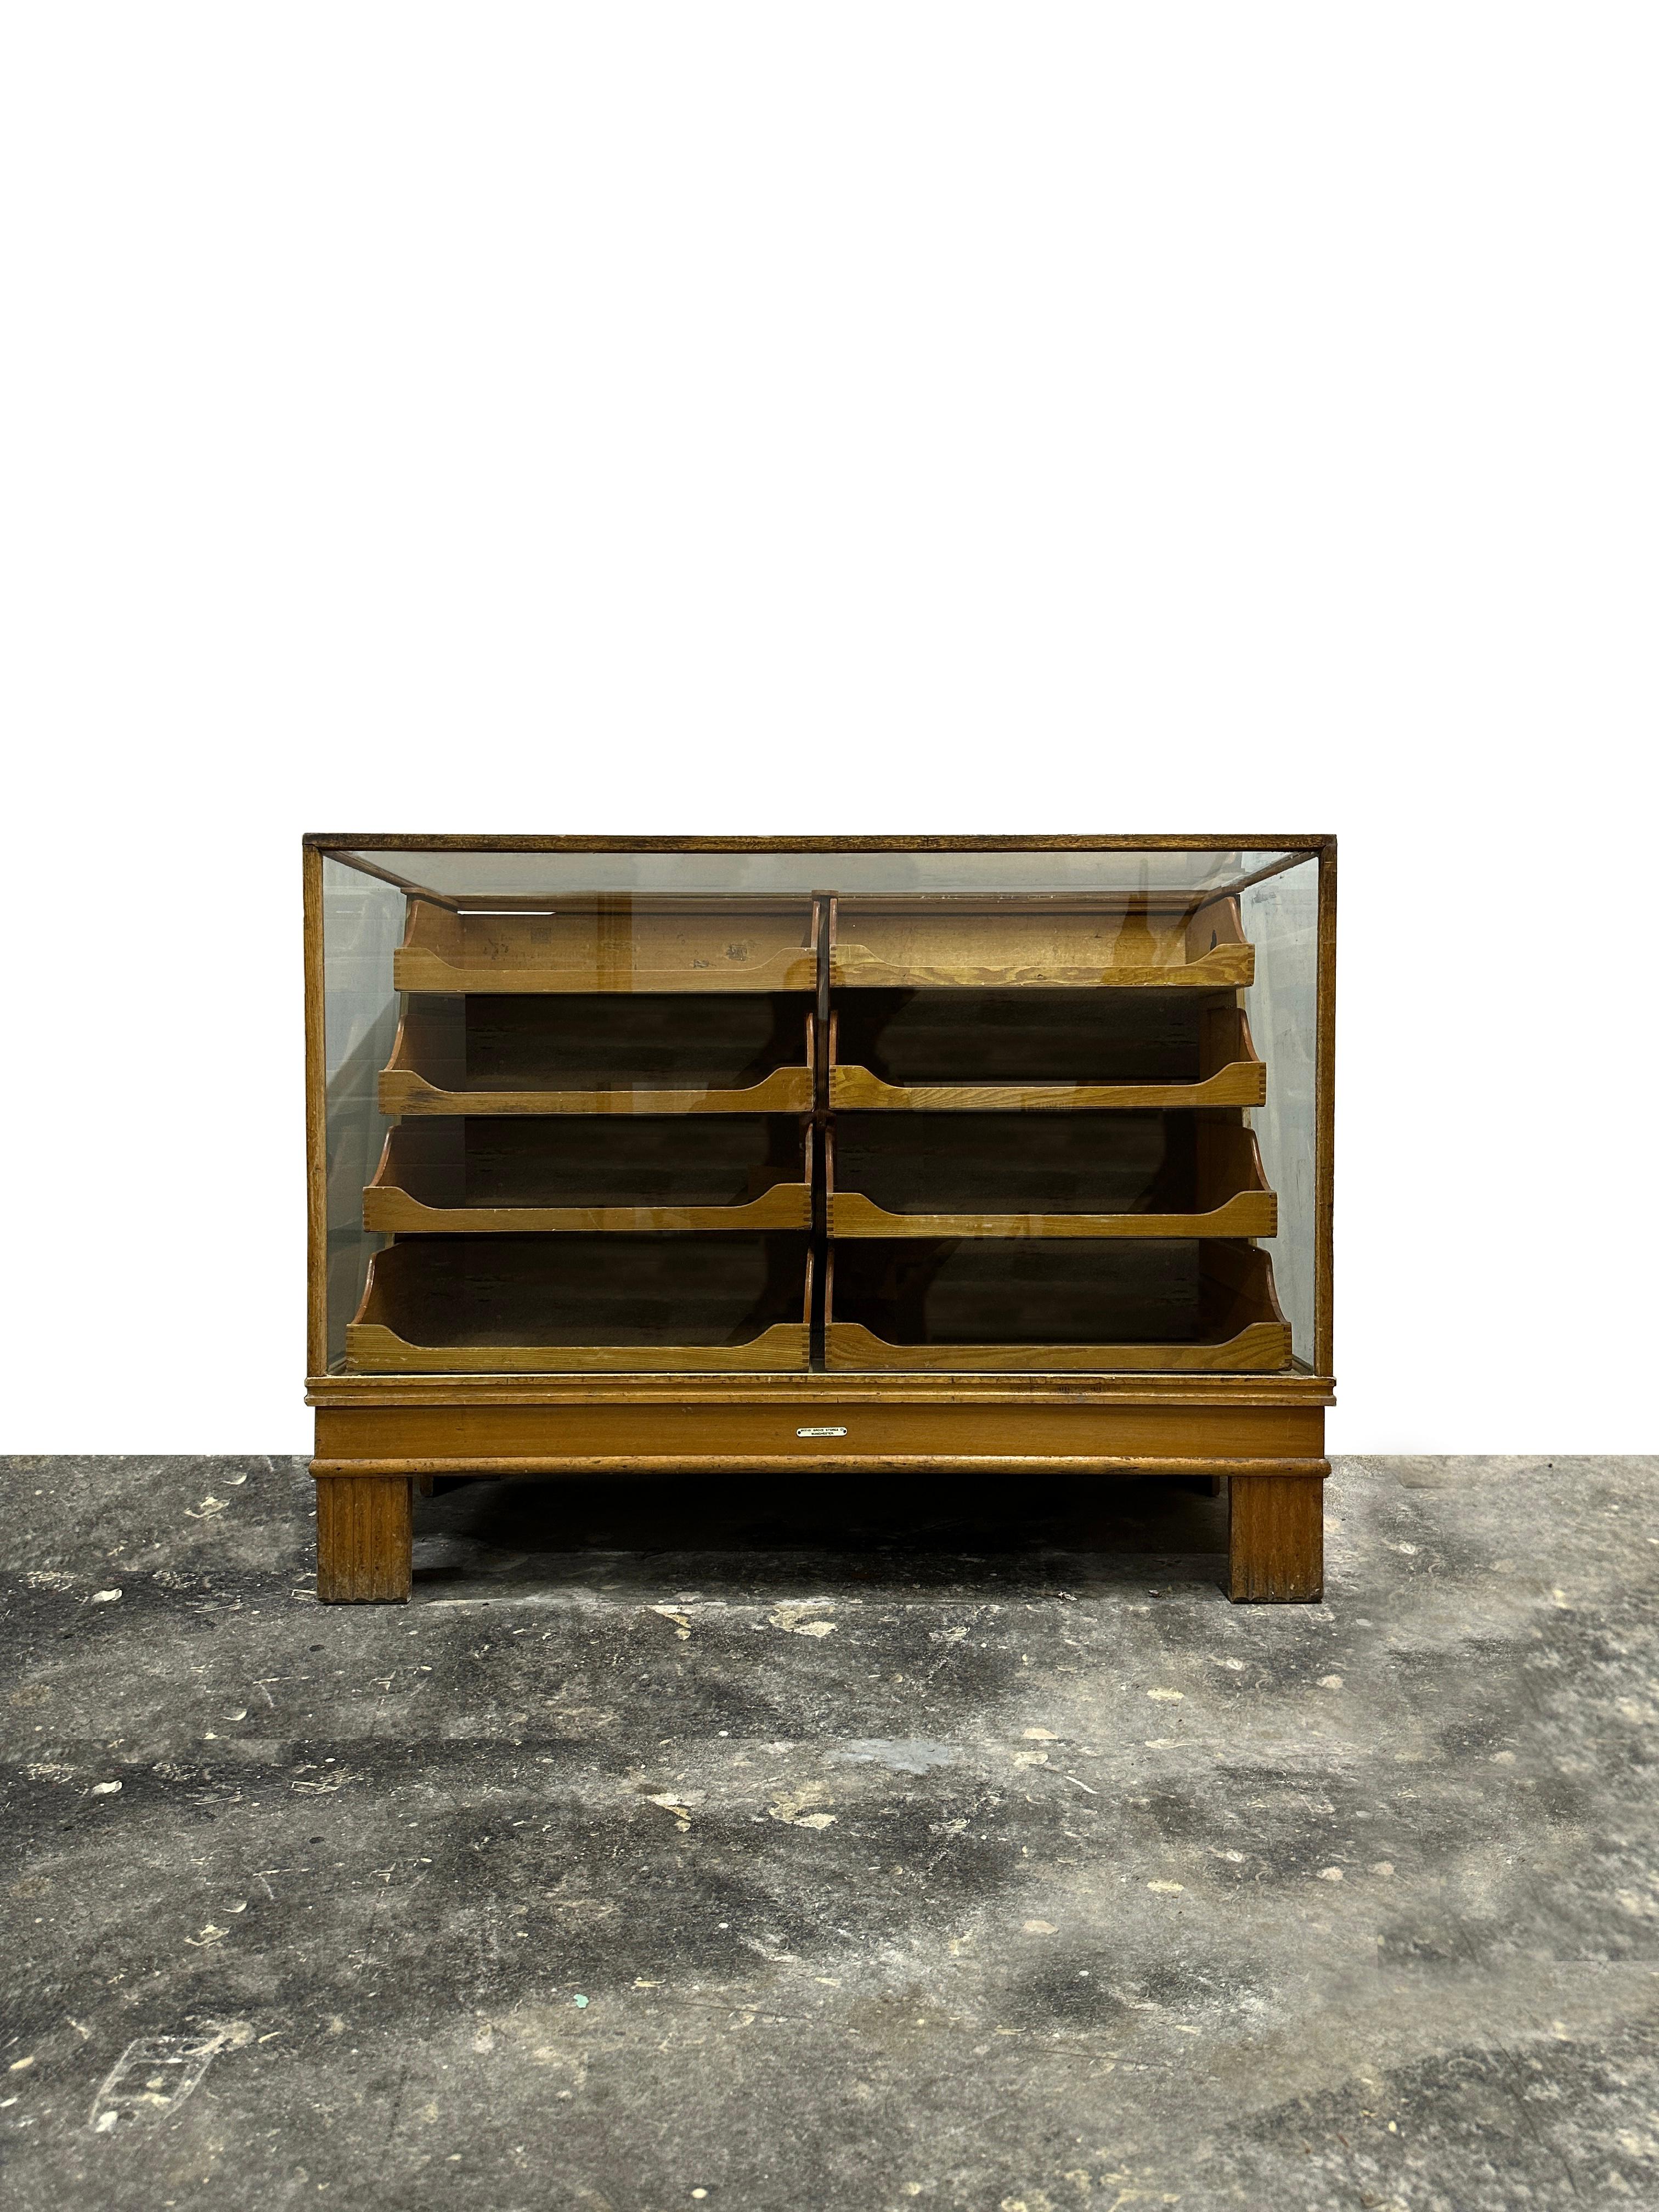 English Antique Vintage Industrial Haberdashery Glass Display Cabinet Chest Of Drawers For Sale